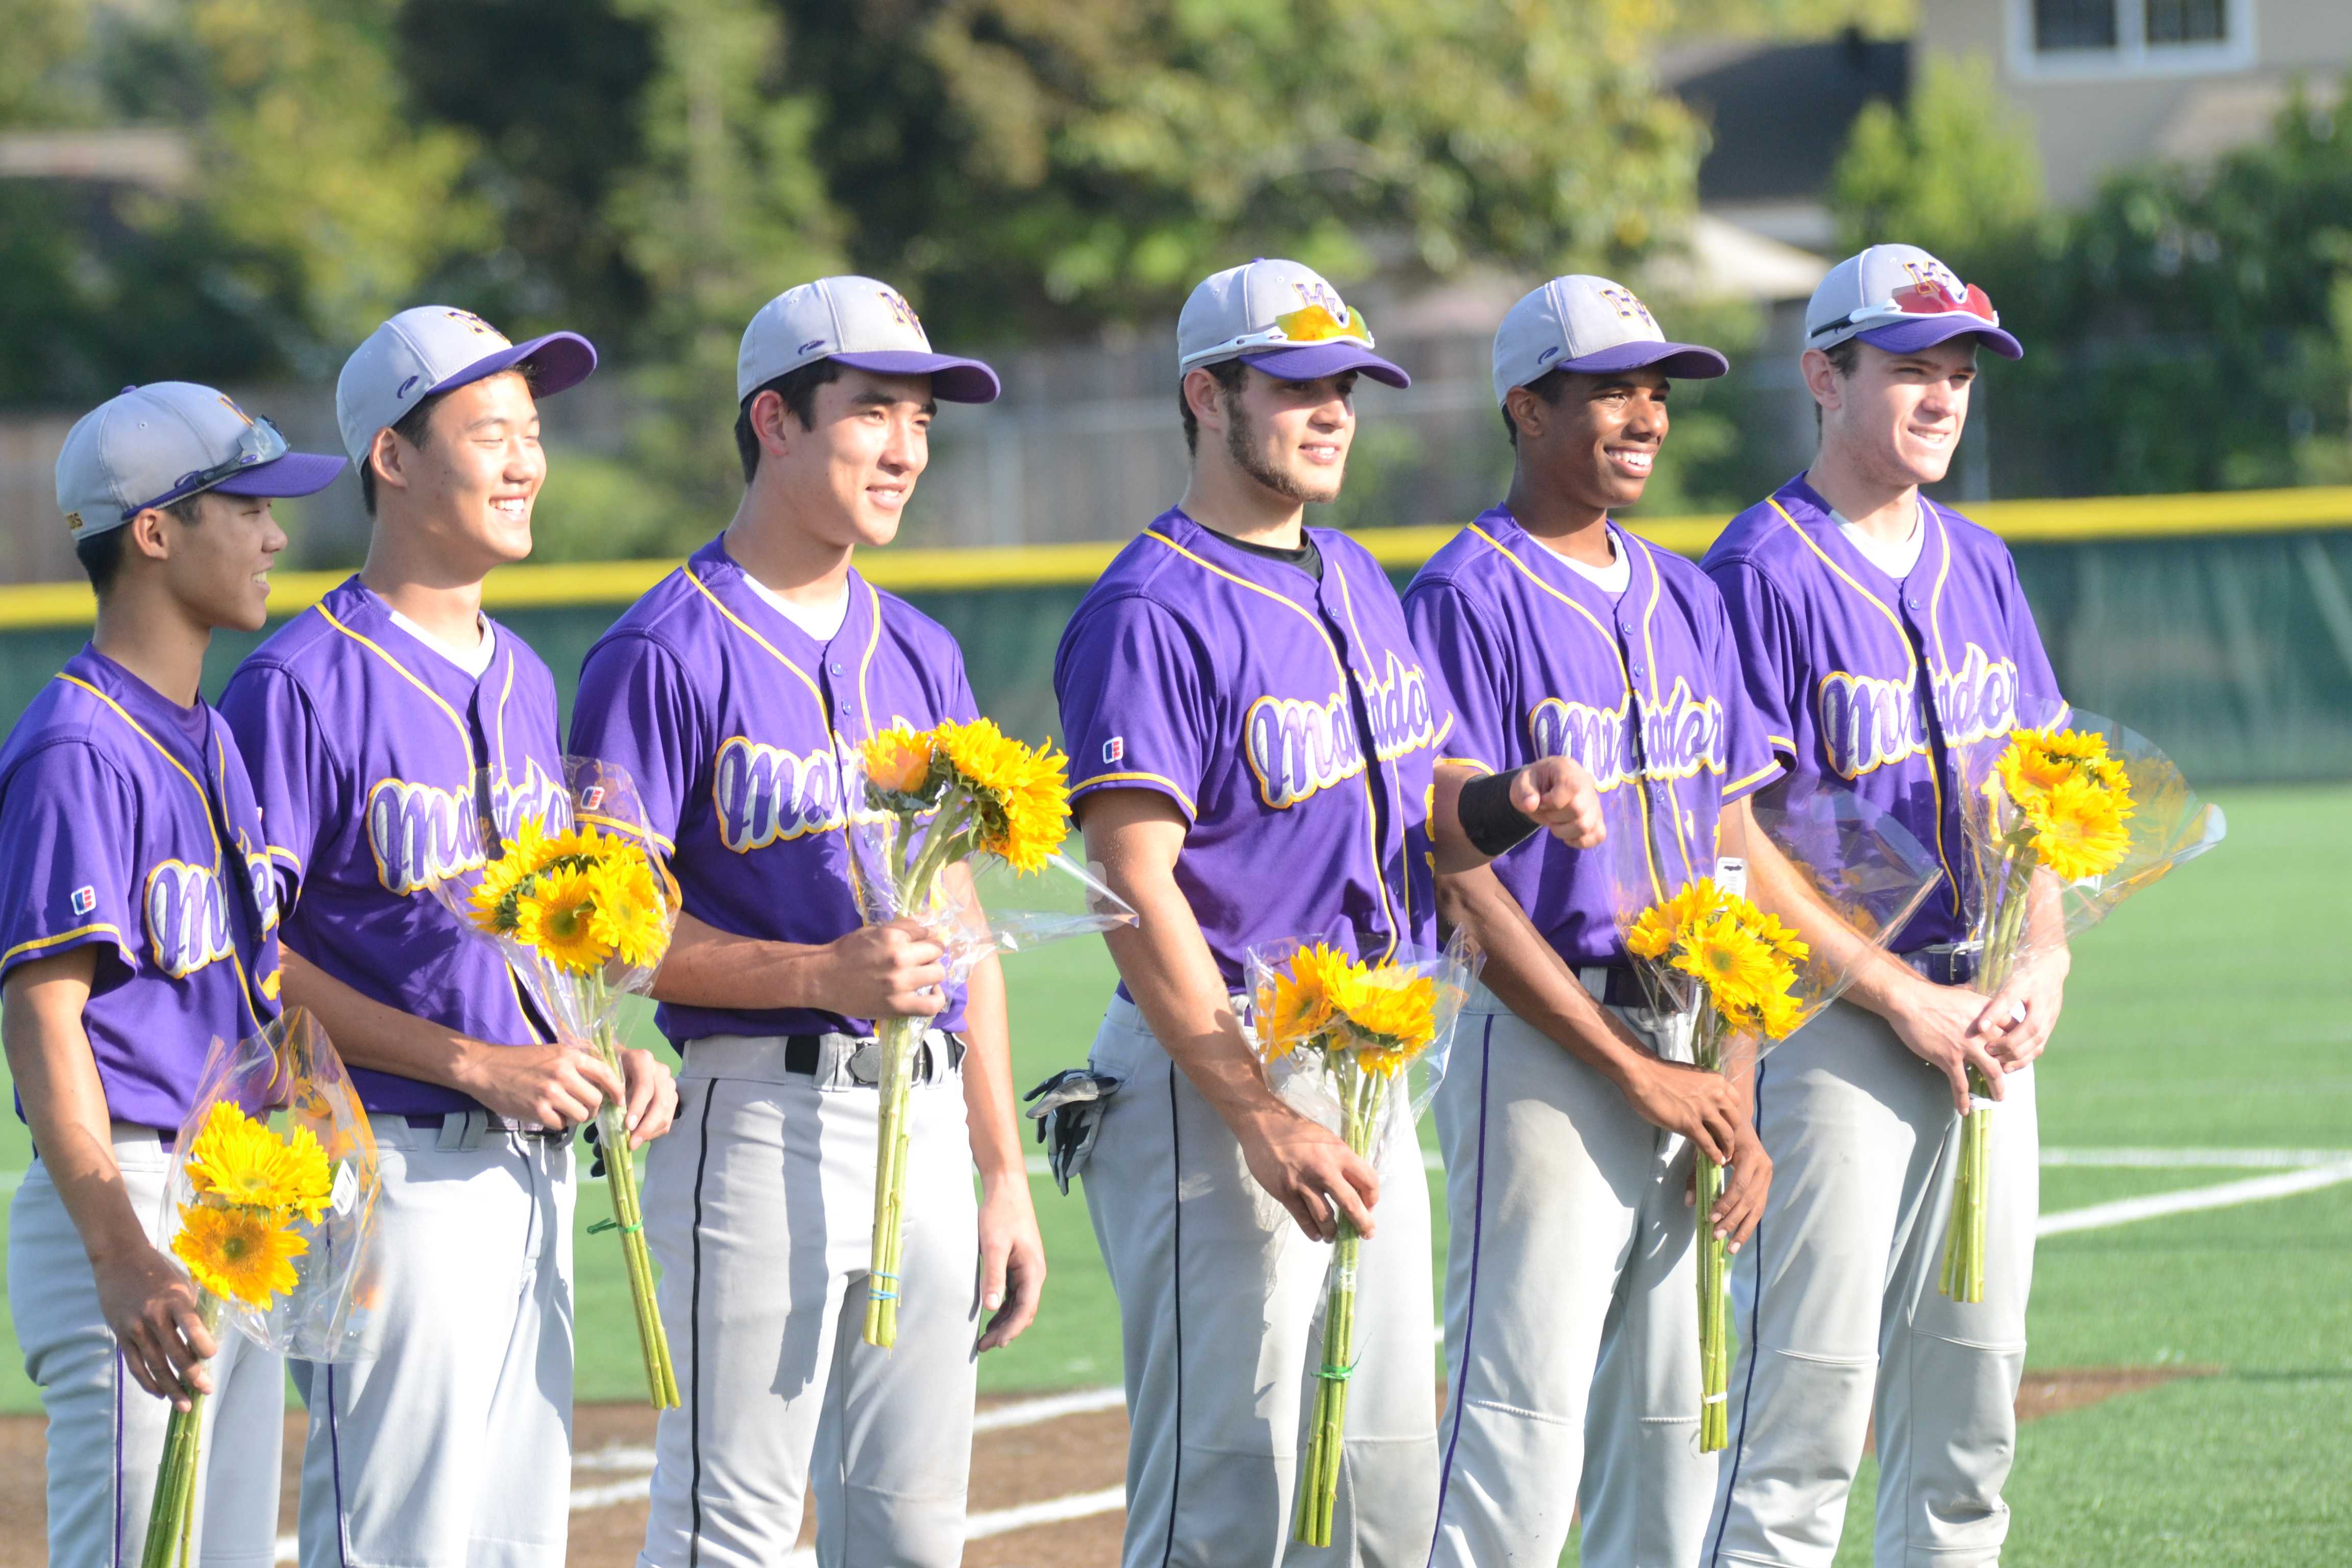 The Matadors will be losing their senior class. This consists of, going from left to right, Timothy iwamoto, William Shih, Danny Takahashi, Sam Nastari, Sheldon McClelland and Kevin Nordby. Photo by Pranav Iyer.